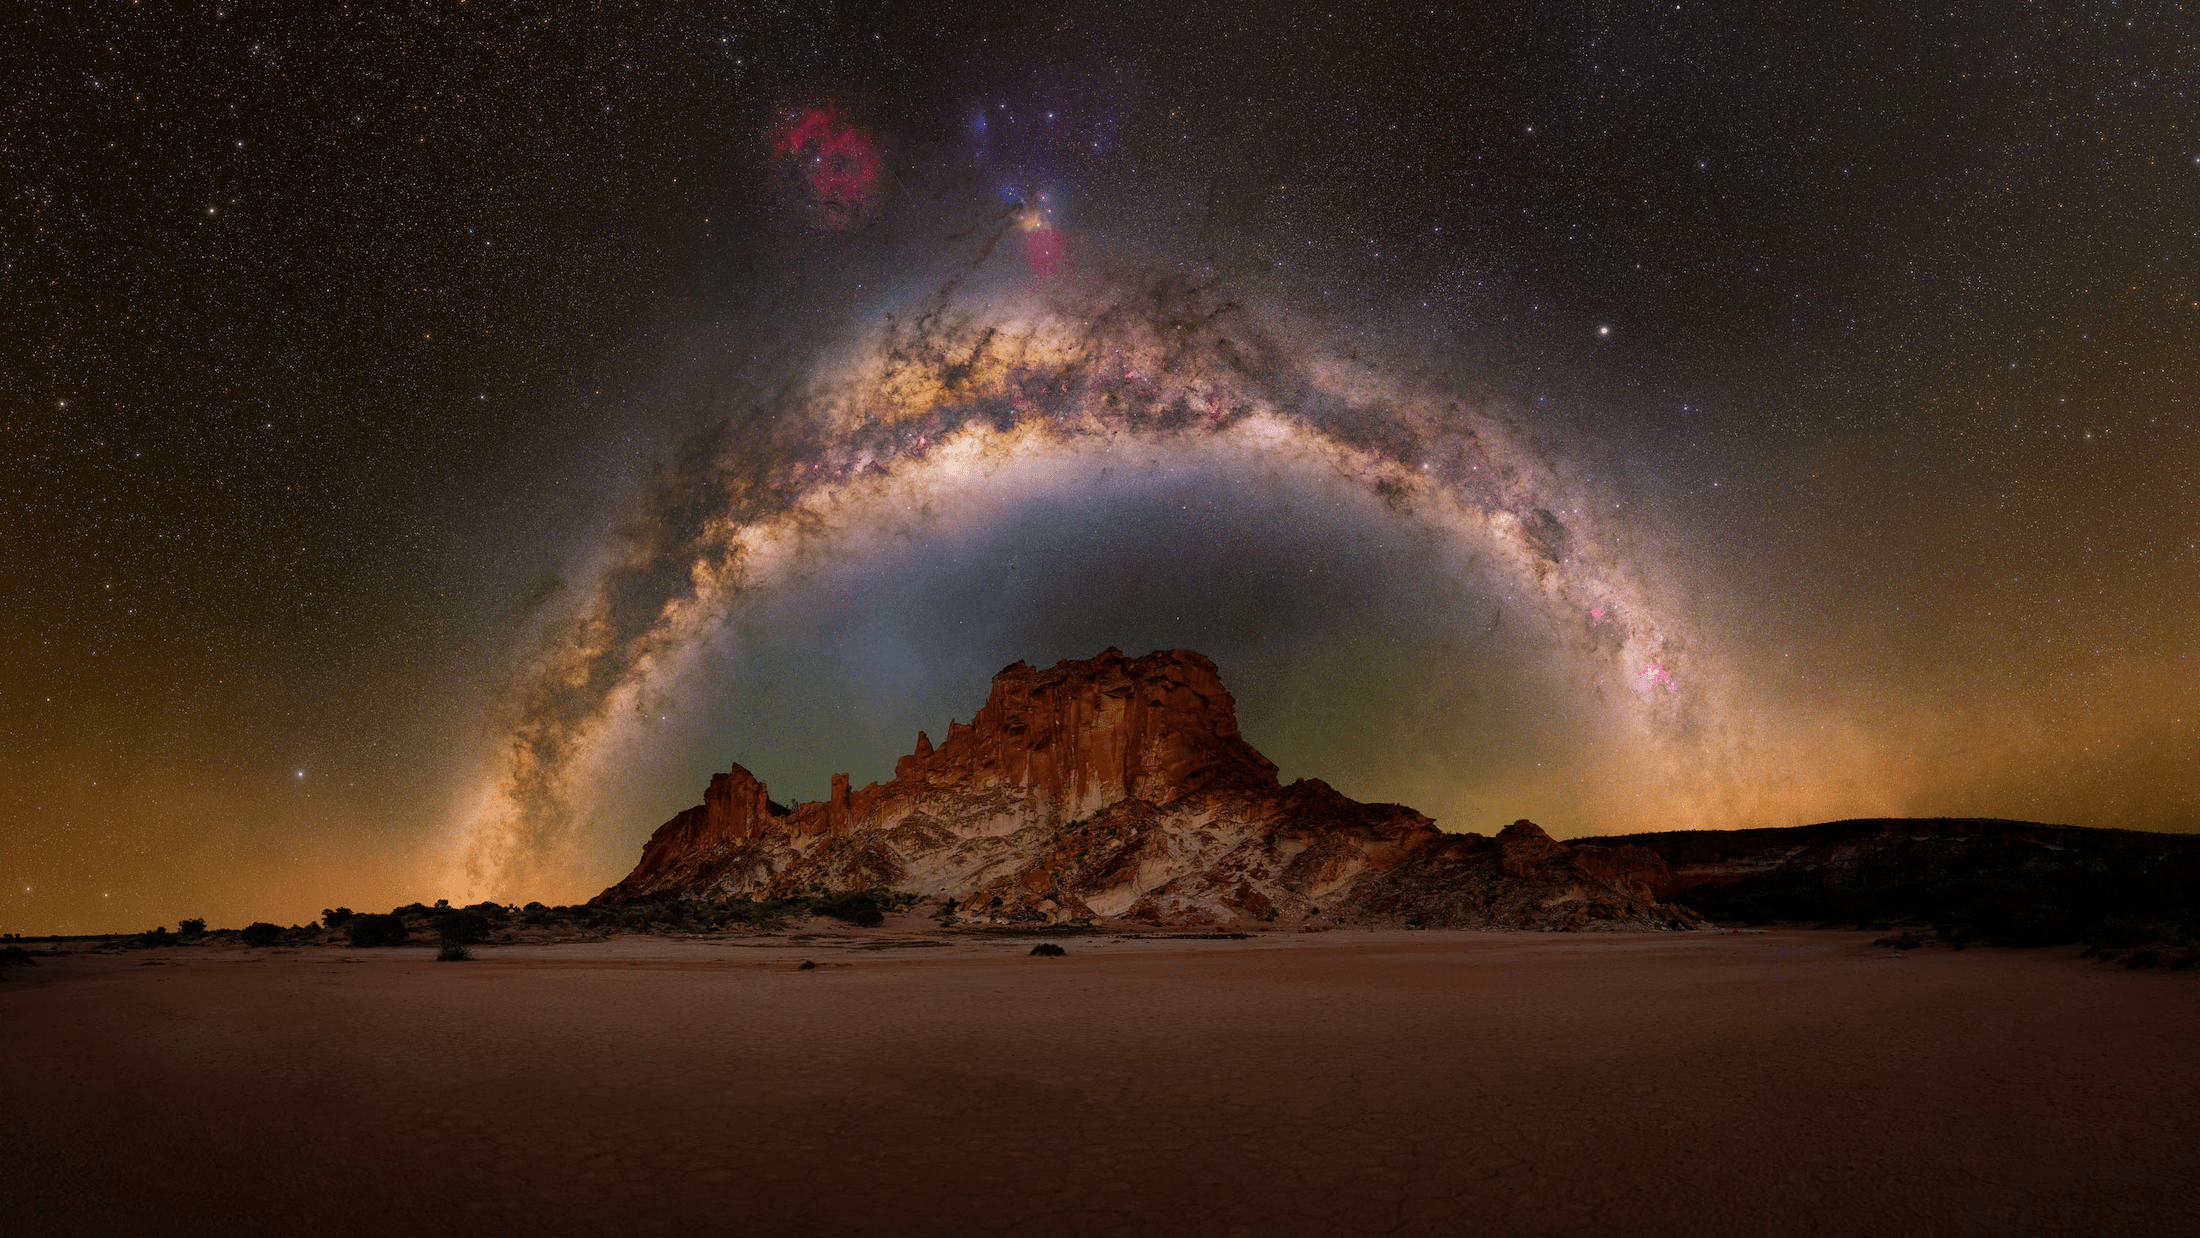 an outcrop of sandstone in the flat desert with a half circle of the milky way above